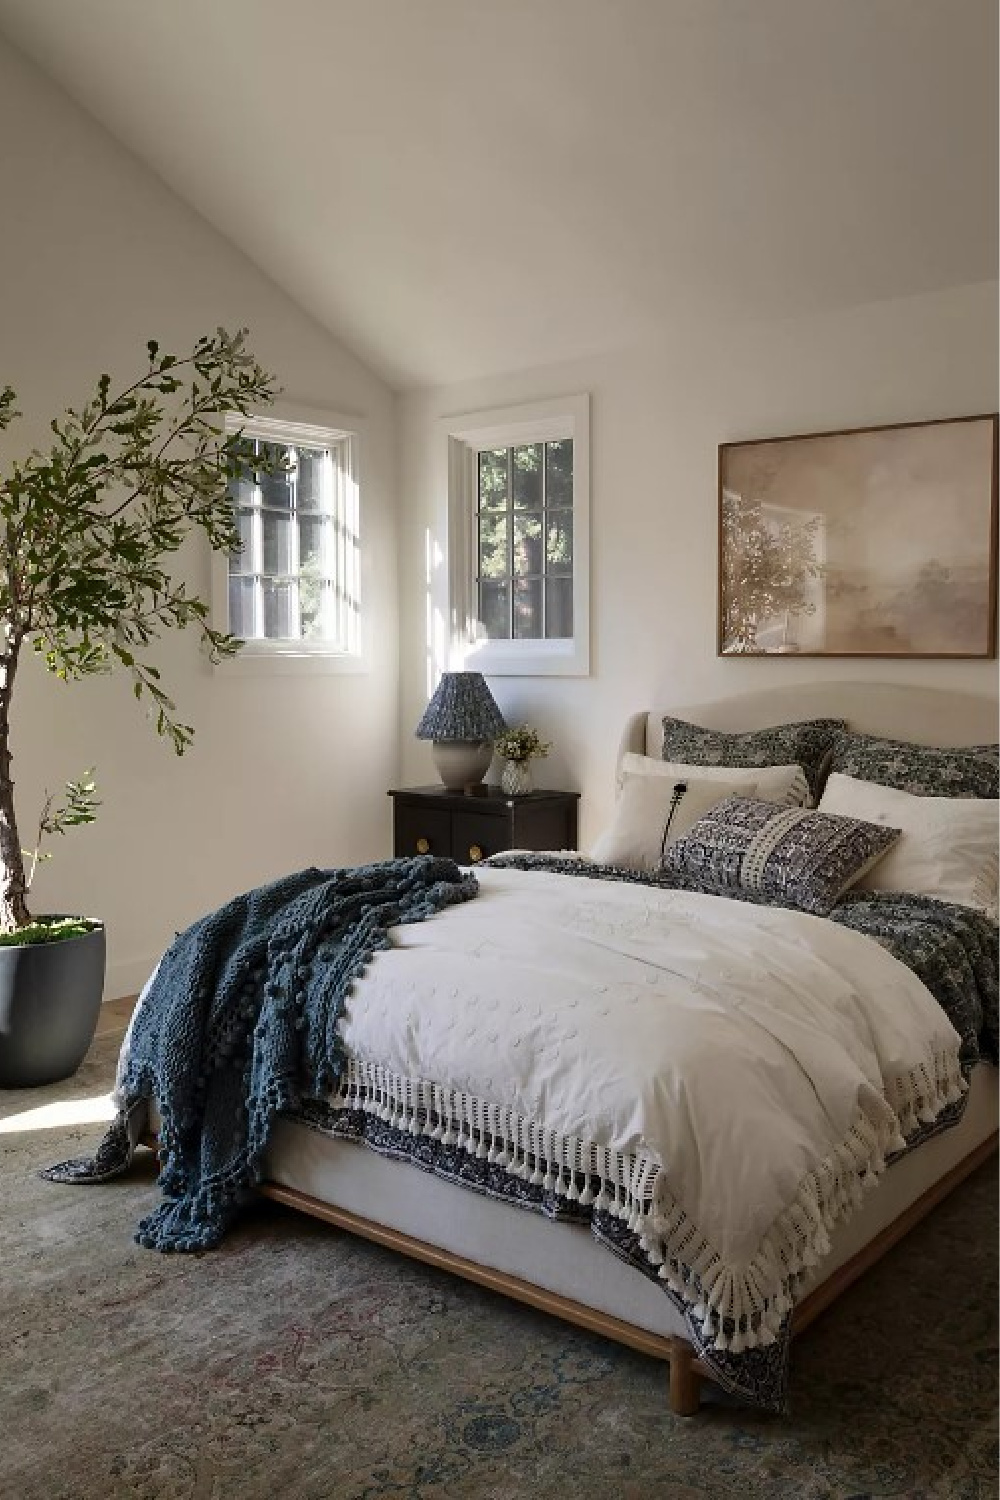 Beautiful California cool laidback bedroom designed by Amber Lewis with Sweet Medley pillow. #bedding #amberlewis